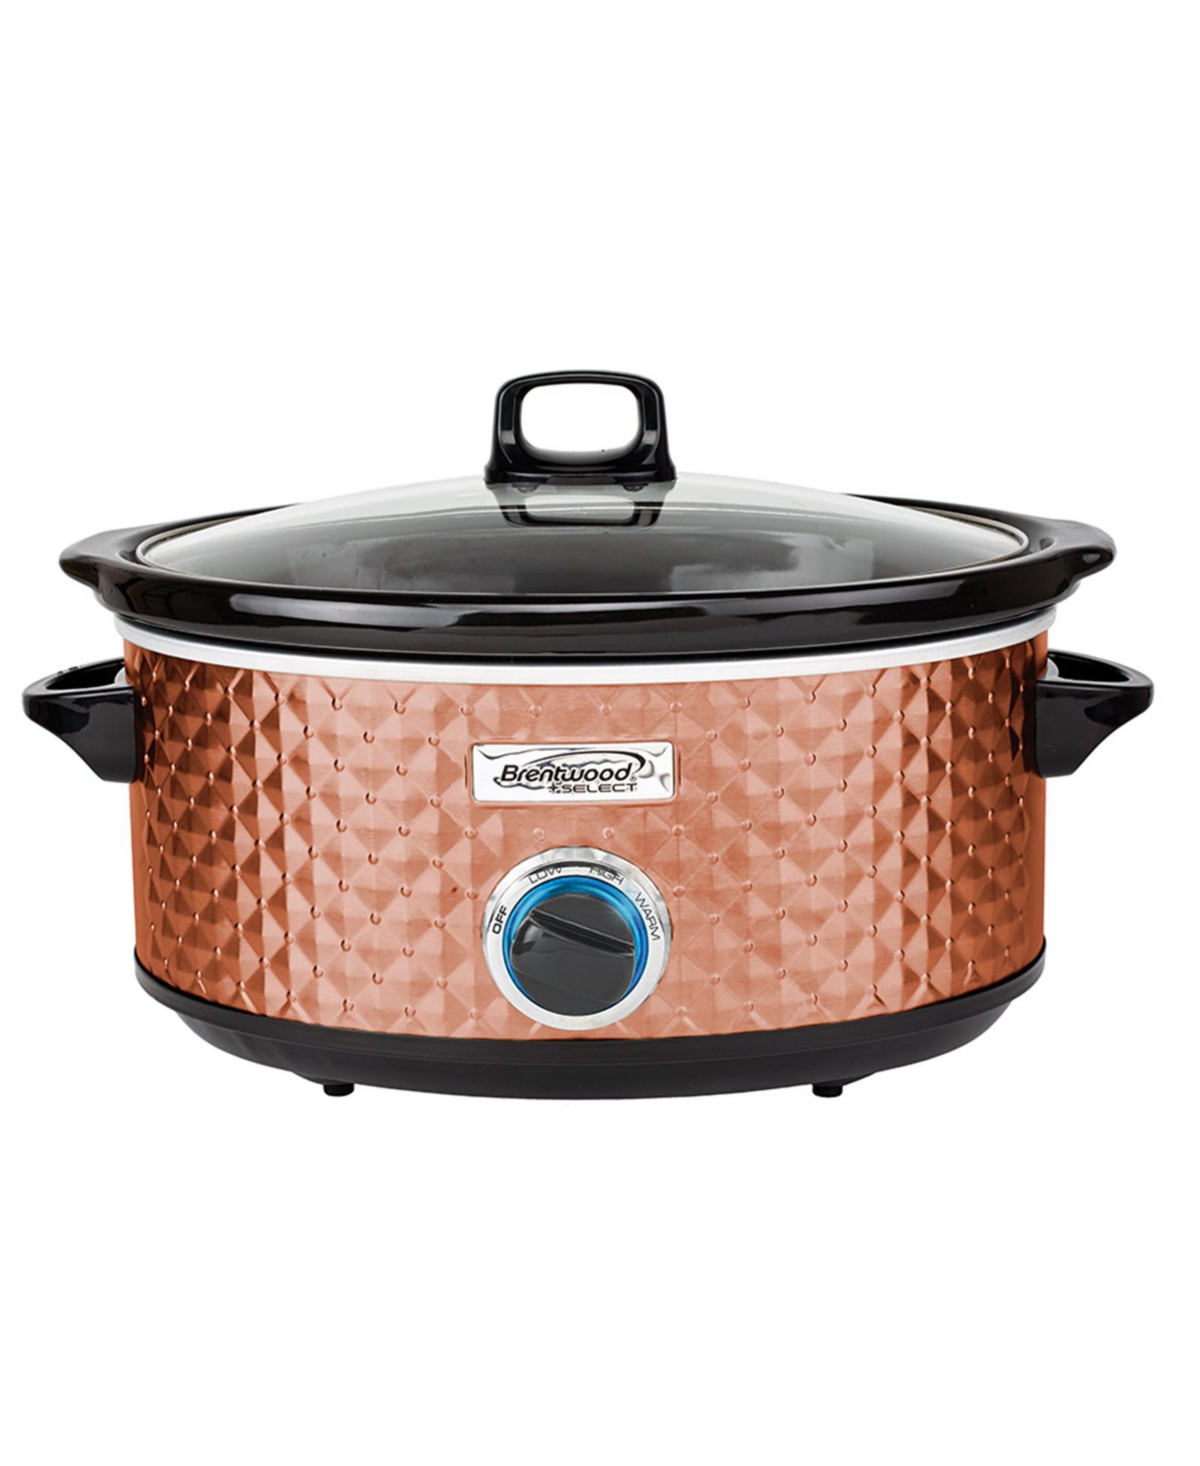 Brentwood Select 7 Quart Slow Cooker in Copper - Rust/copper